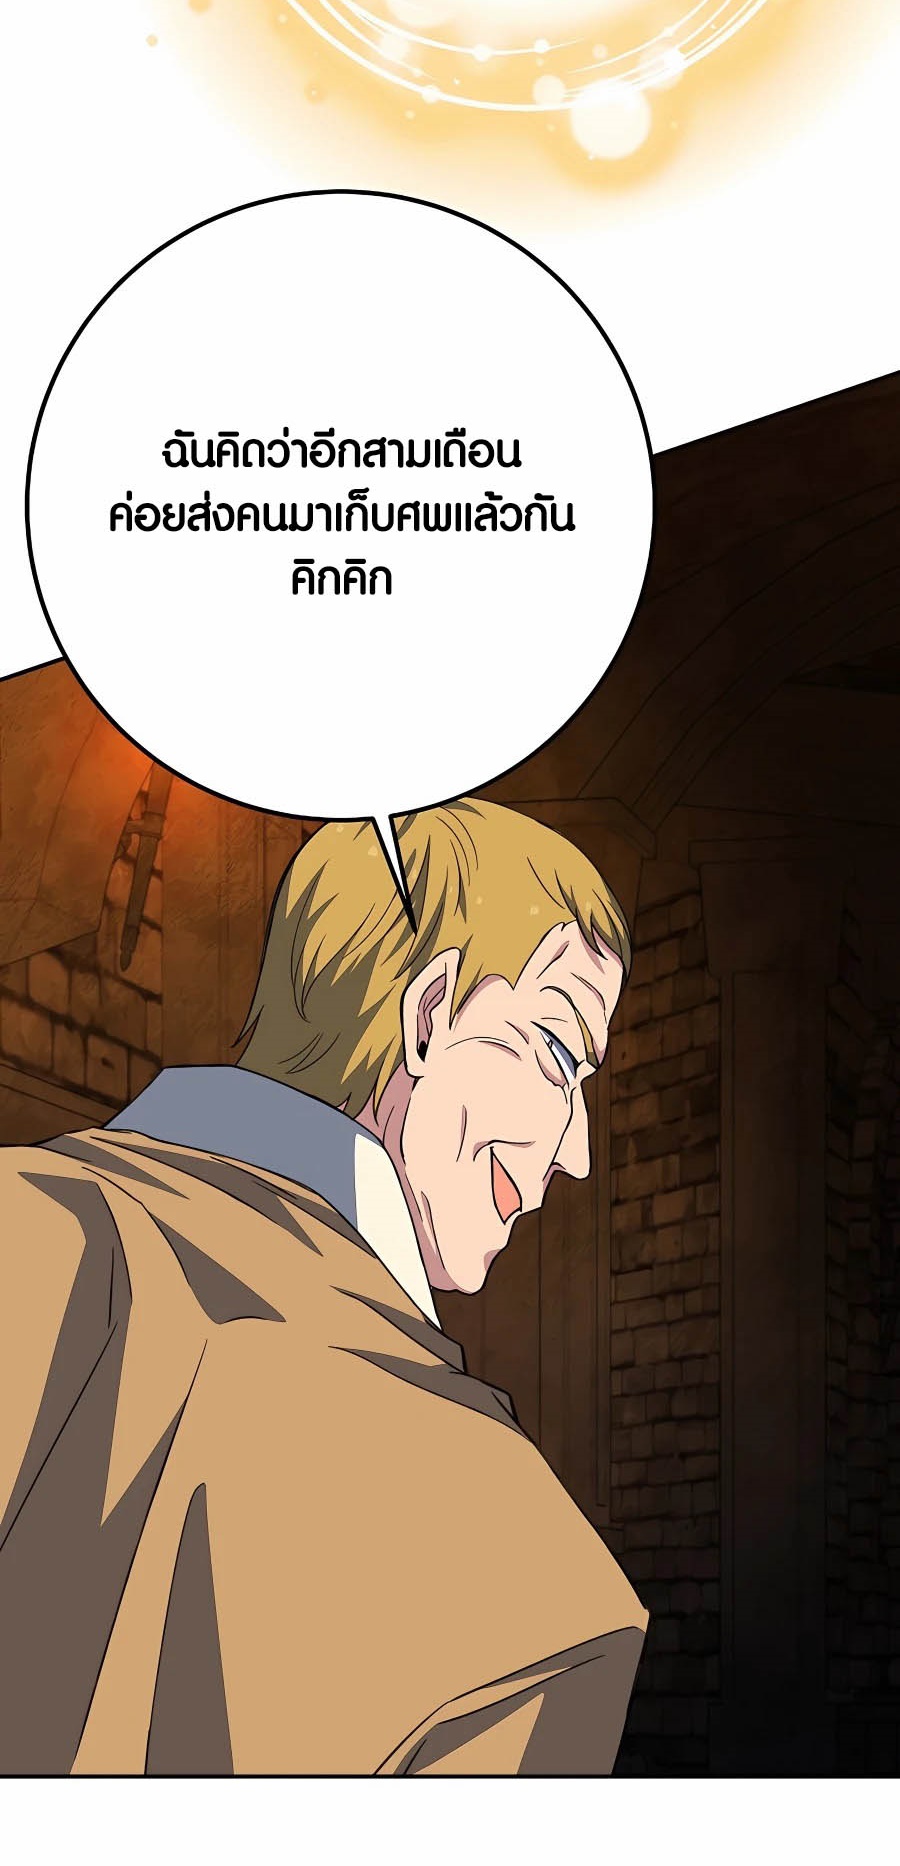 à¸­à¹ˆà¸²à¸™à¸¡à¸±à¸™à¸®à¸§à¸² à¹€à¸£à¸·à¹ˆà¸­à¸‡ The Part Time Land of the Gods 56 87